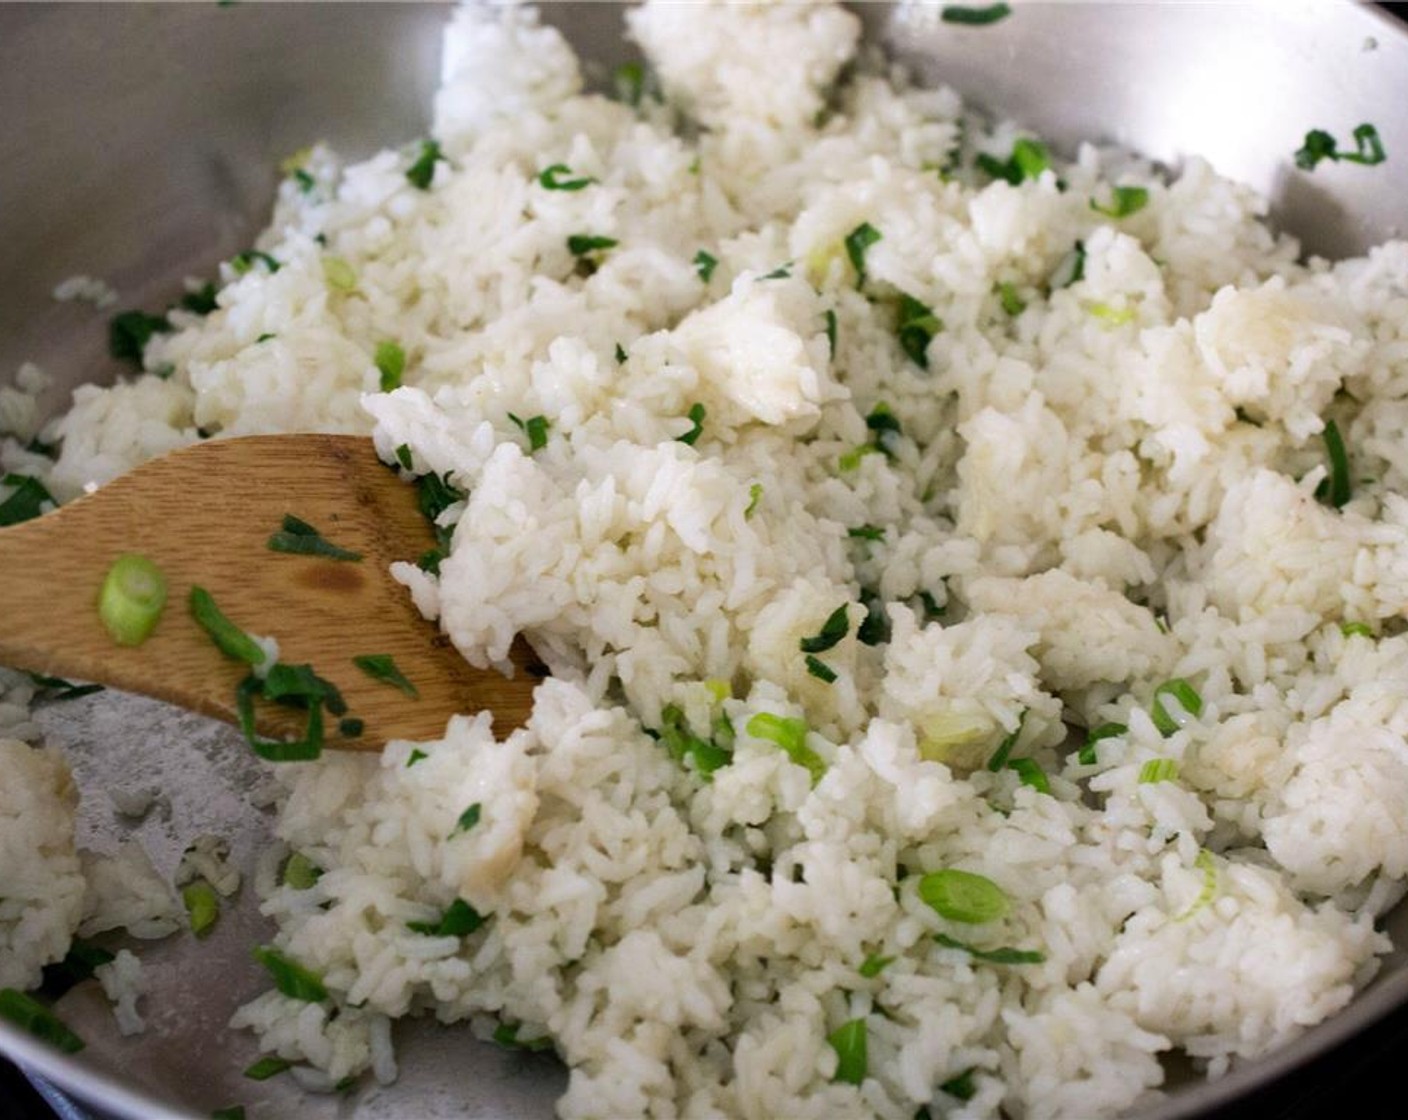 step 4 Stir in White Rice (3 cups), breaking up any large clumps.